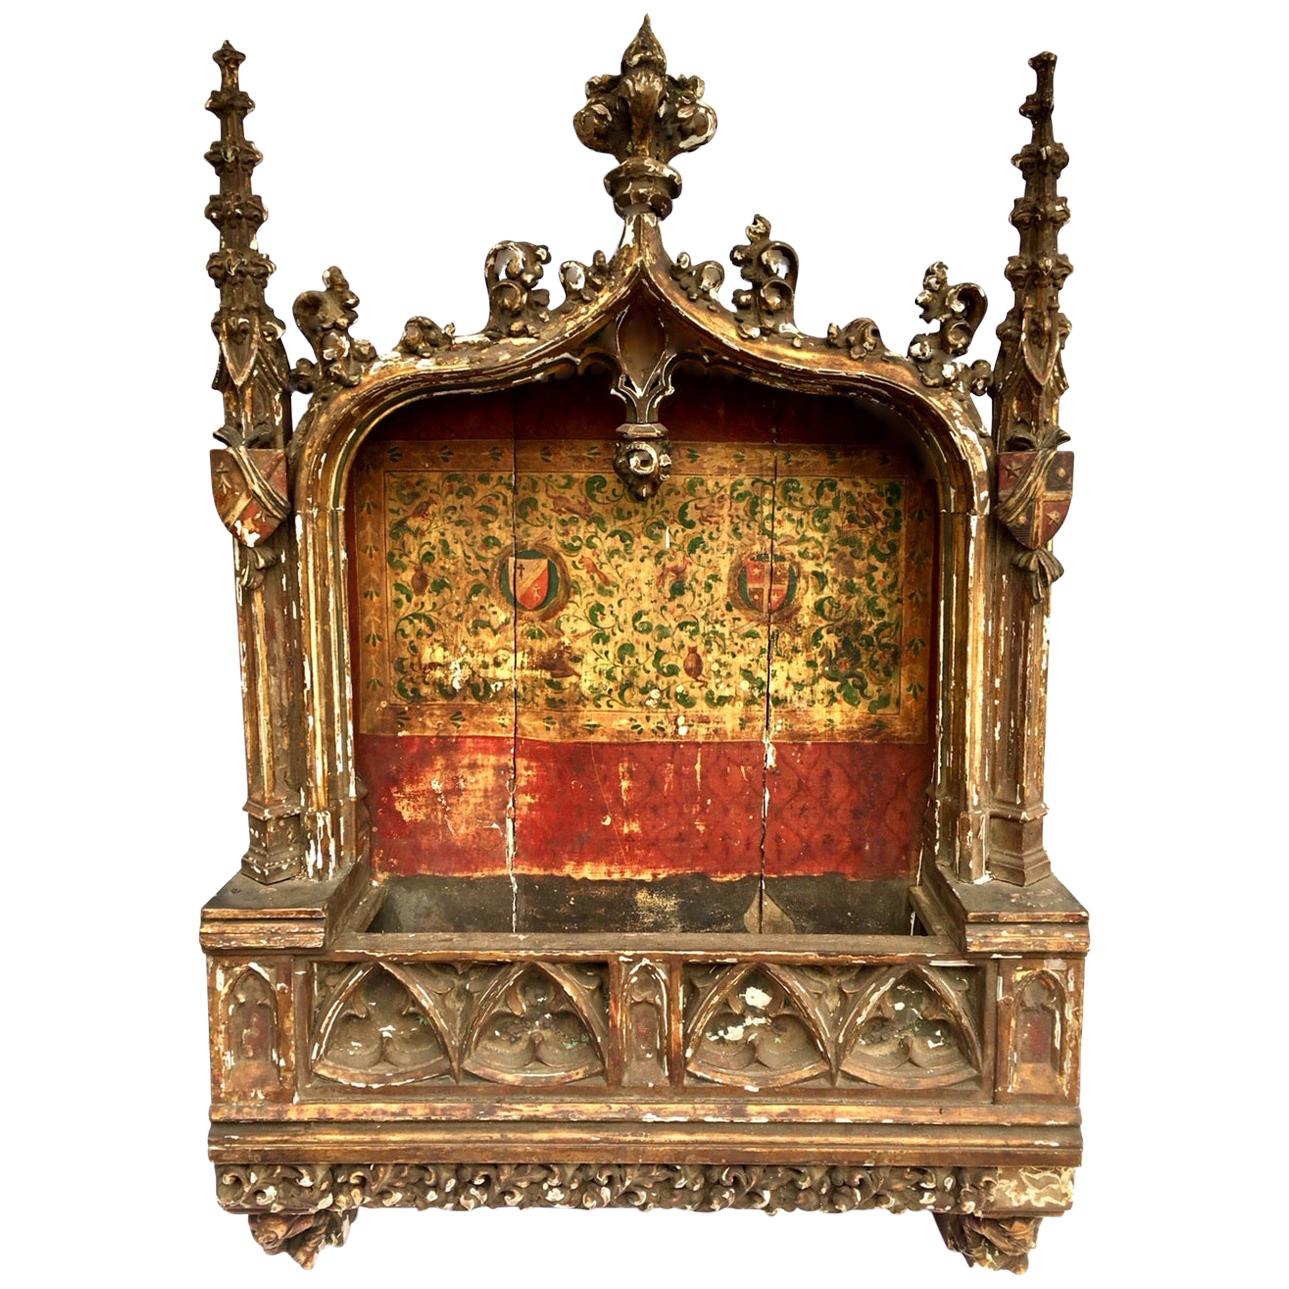 15th C Gothic Tabernacle 4 ft.+ Rare Architectural Religious Art, Museum Quality